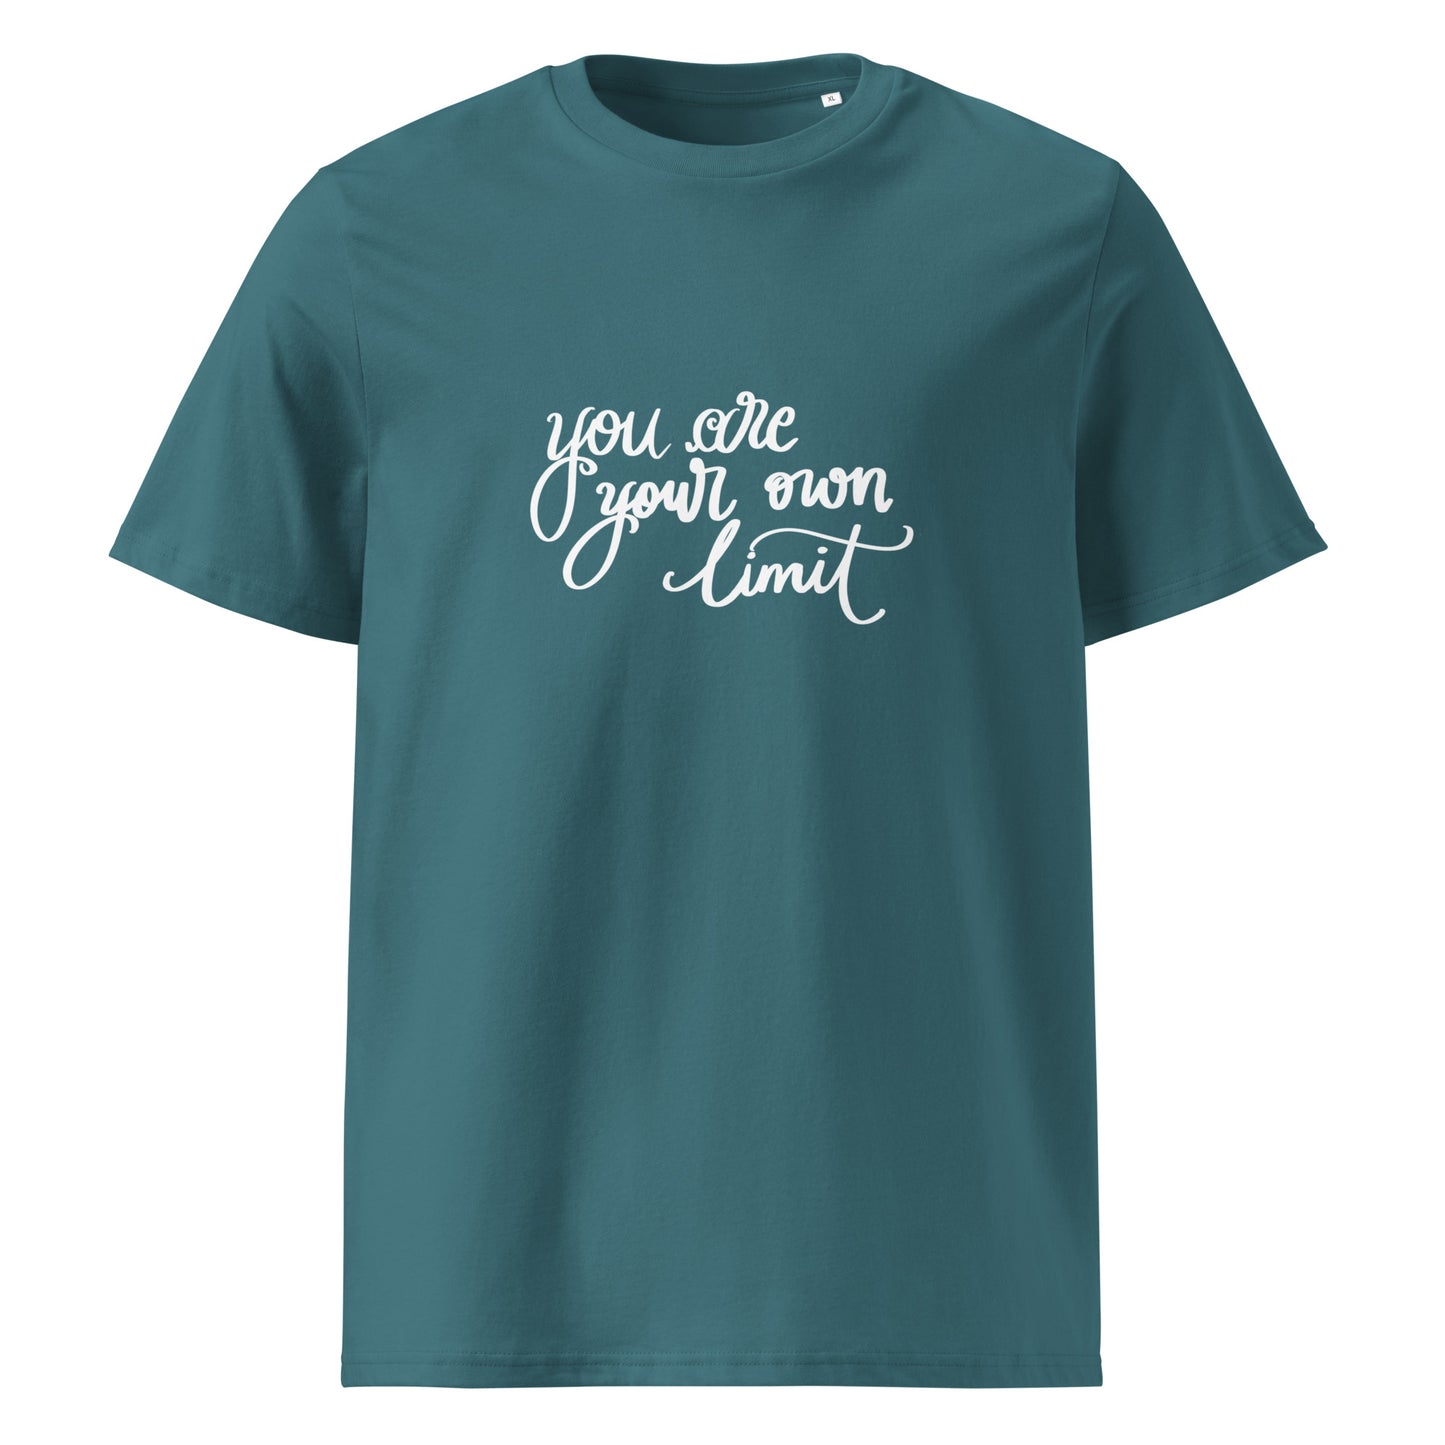 Unisex organic cotton t-shirt "you are your own limit"